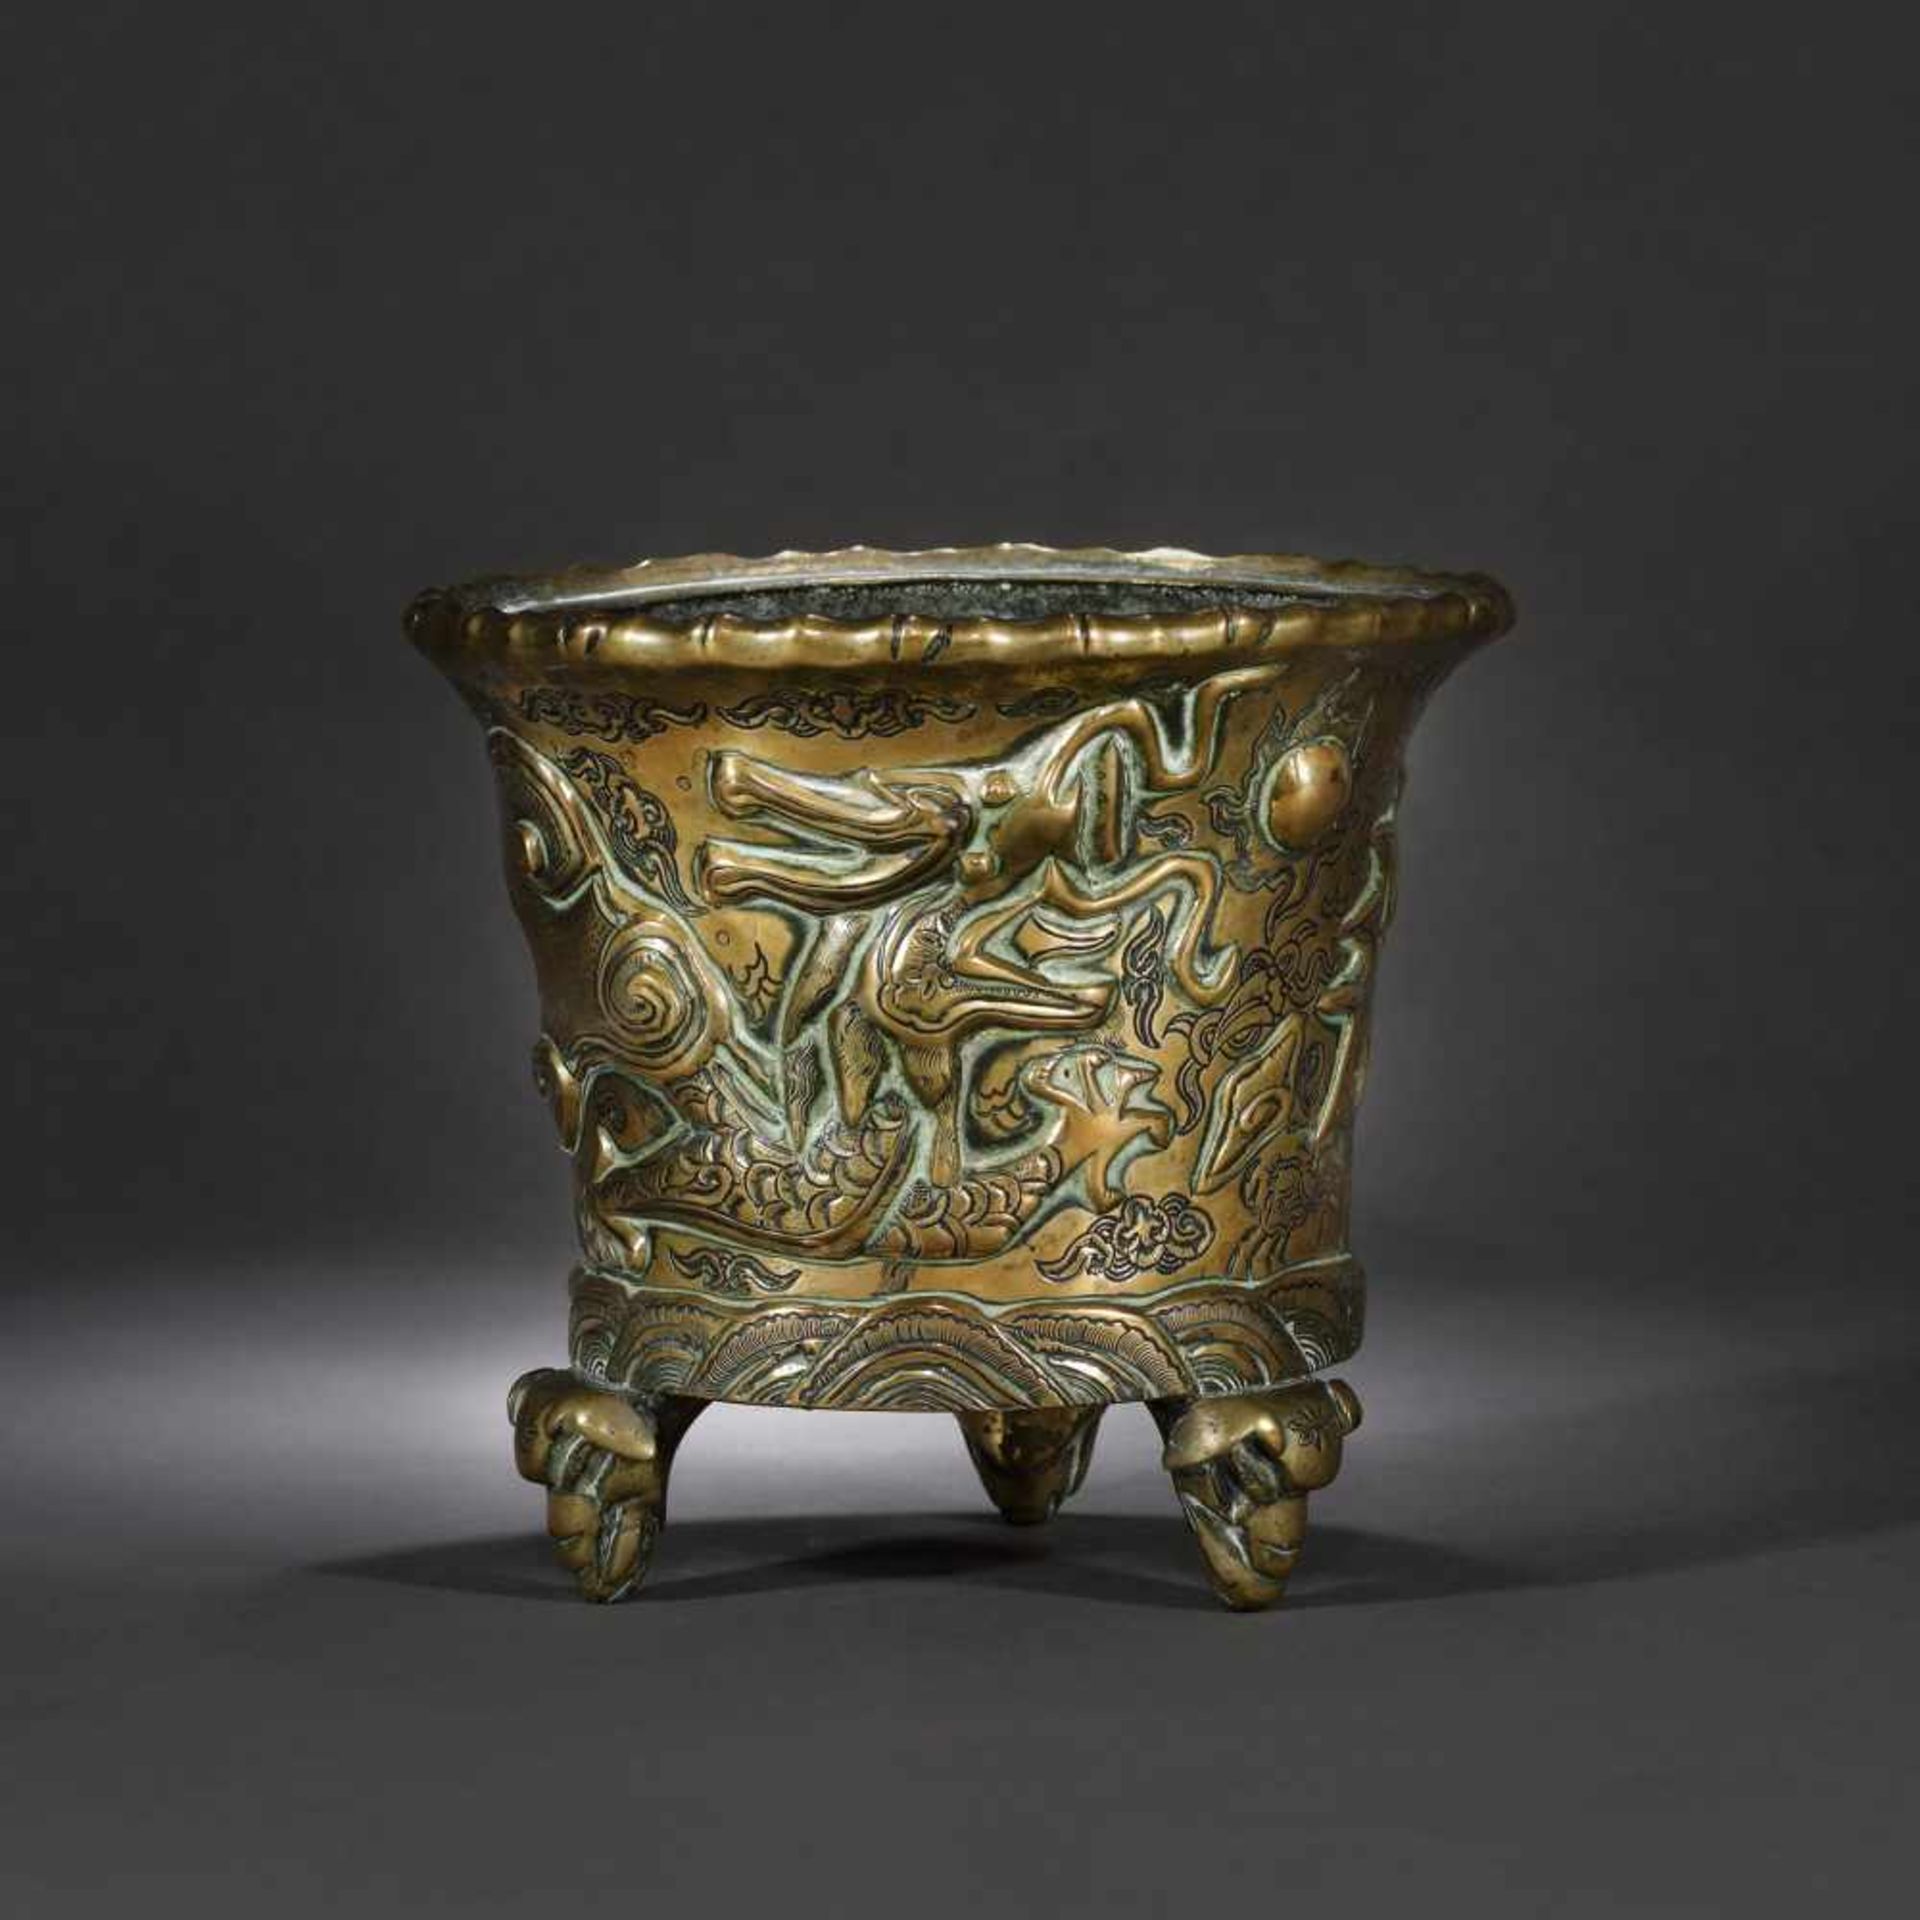 Bronze doré vessel with an imperial five-clawed dragon, the Qing Dynasty Period, China, the 18th